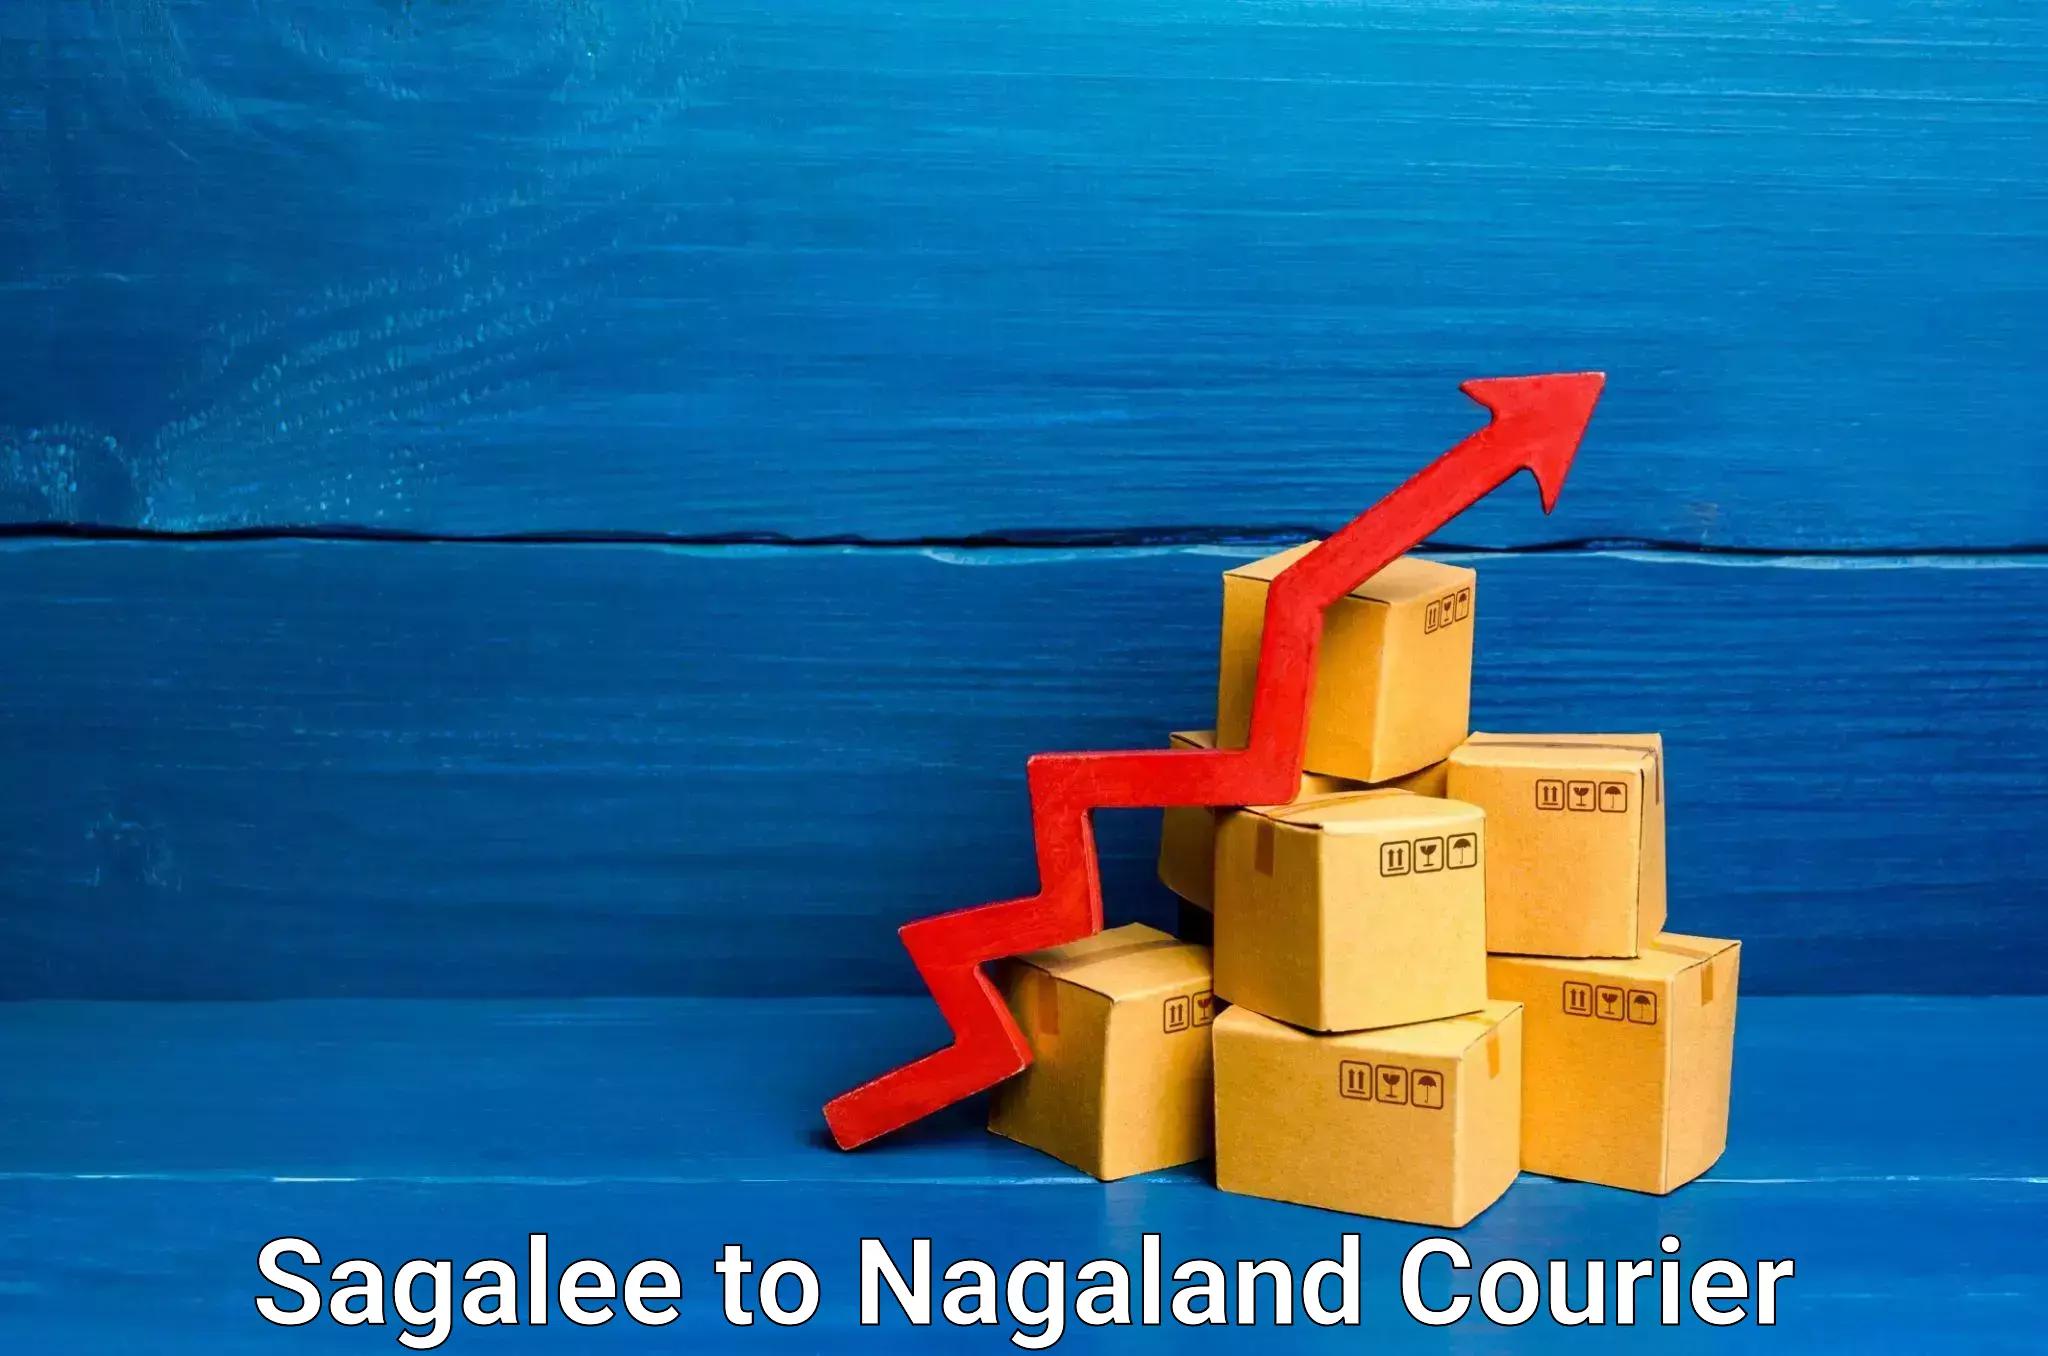 24/7 courier service Sagalee to Nagaland